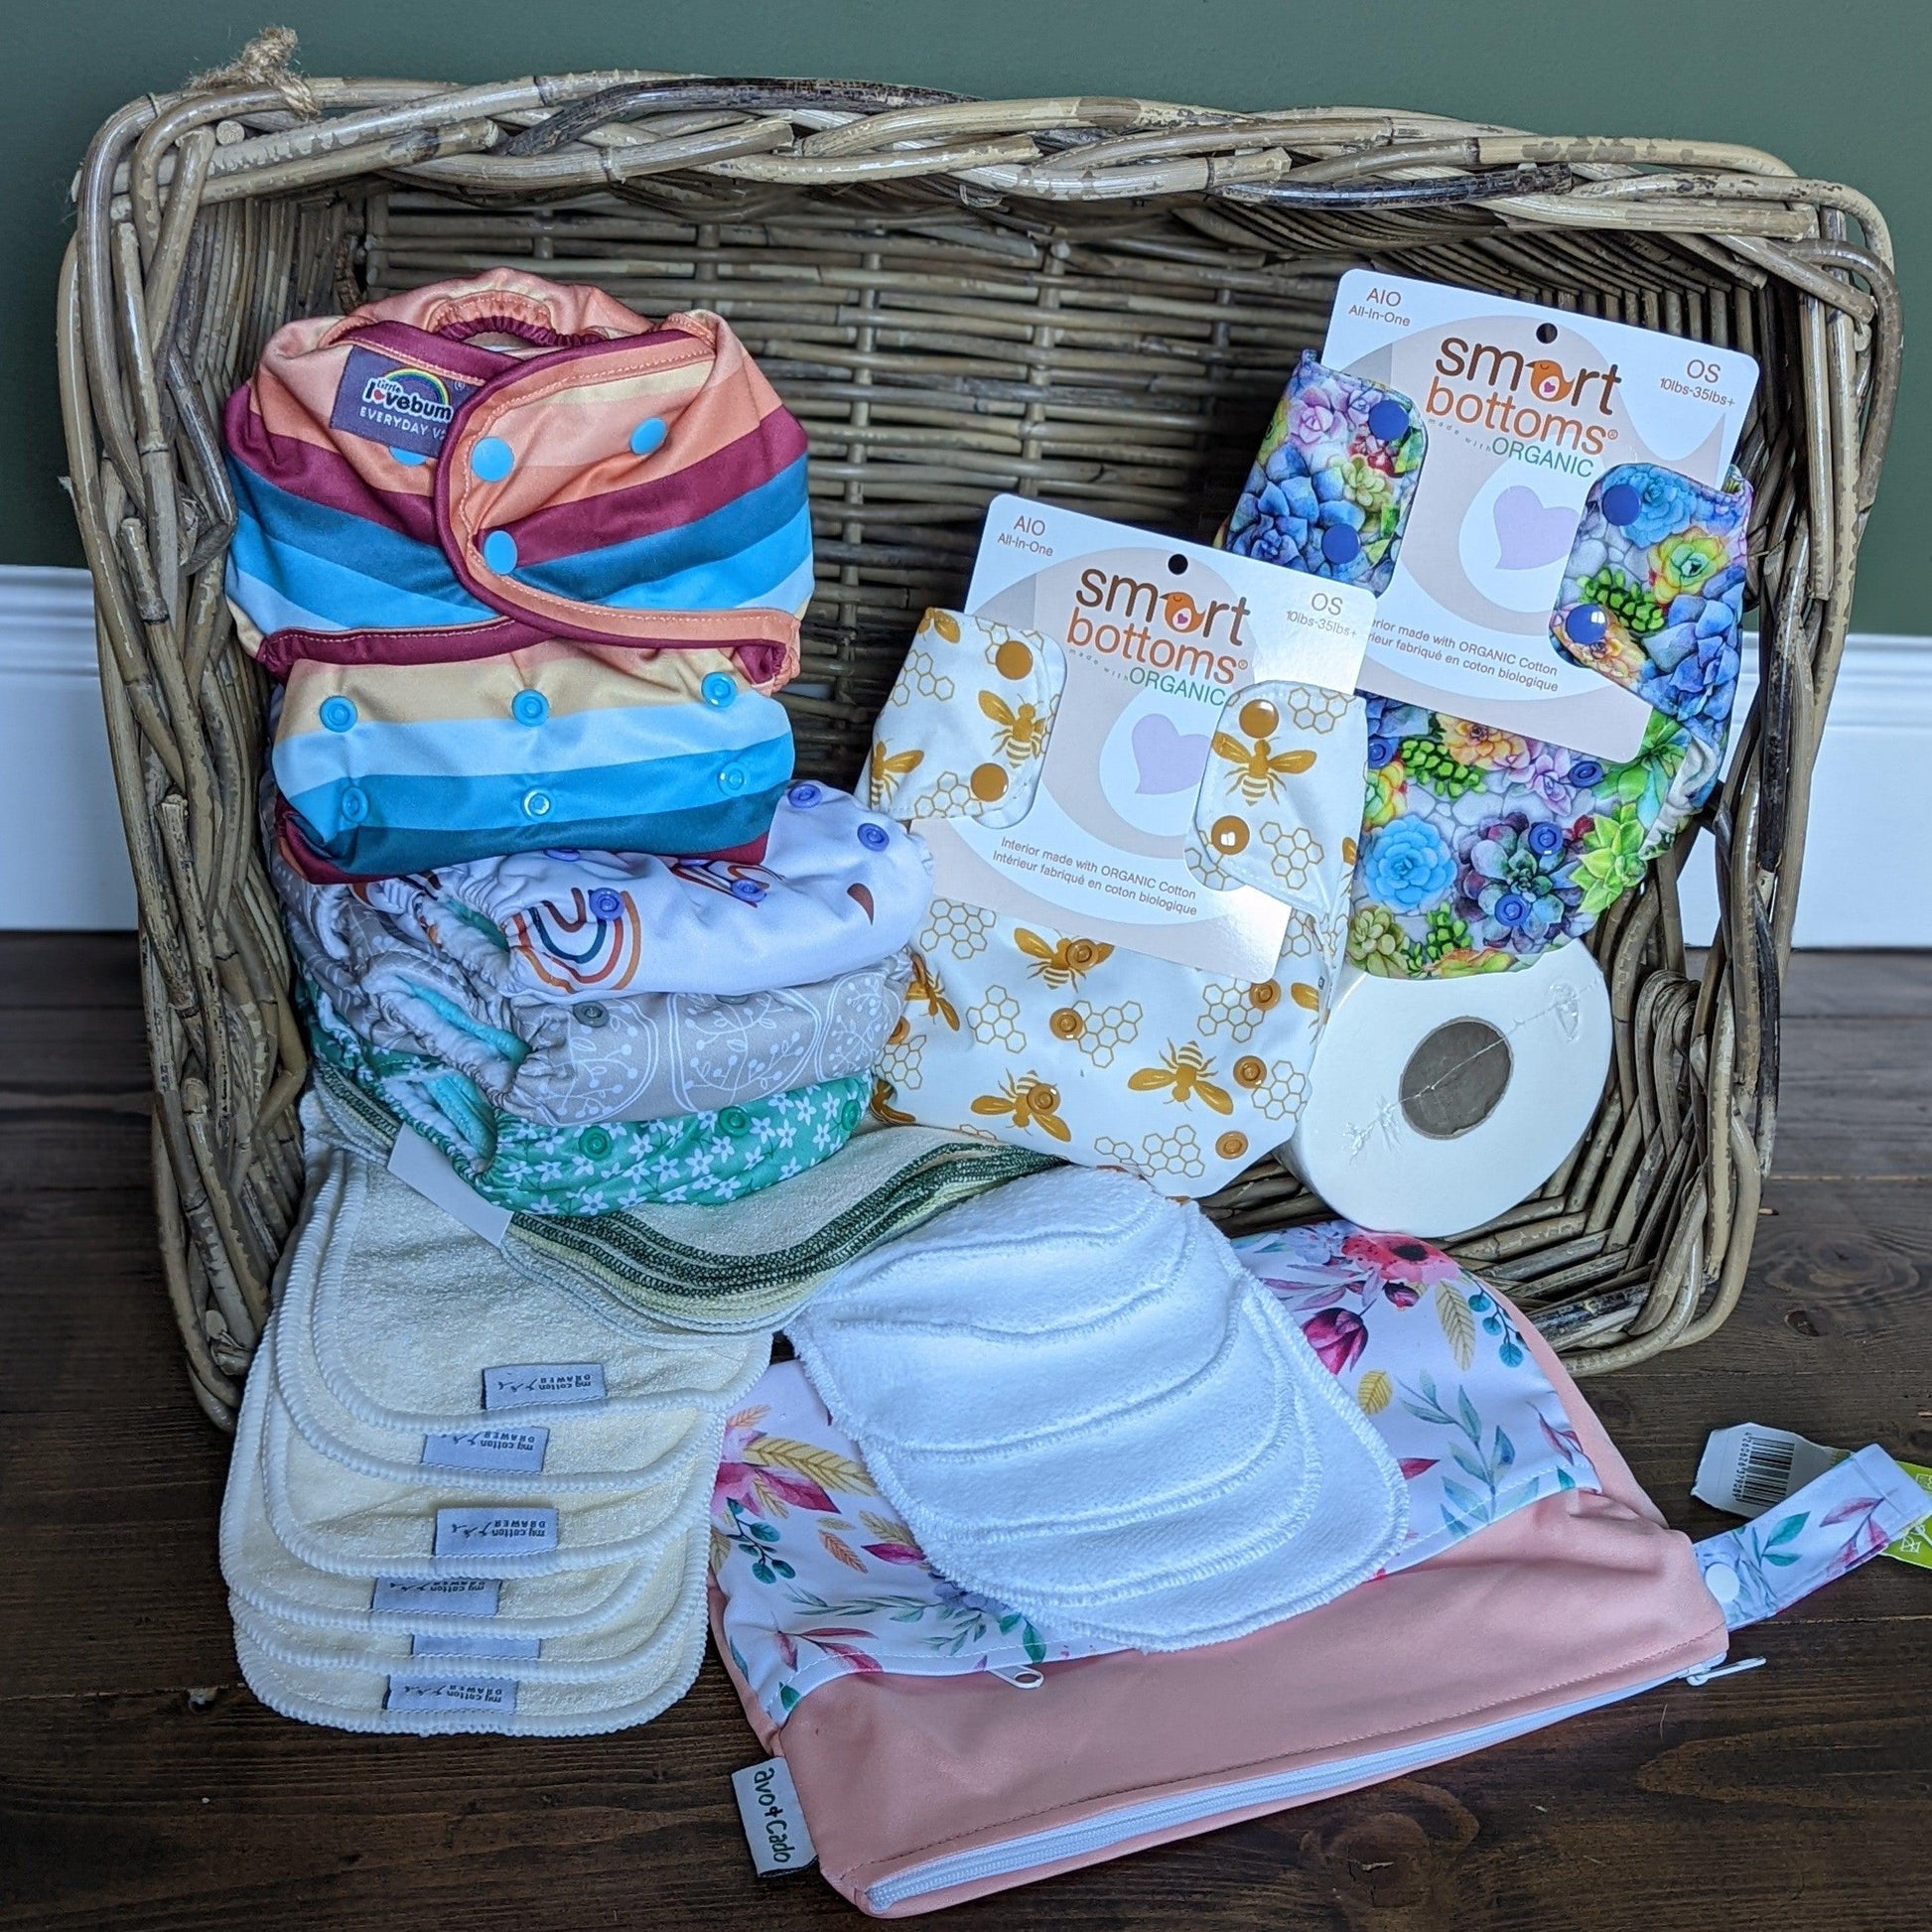 Premium Mixed Starter Nappy Bundle Offer Price €99 - WHILE STOCKS LAST-Bundle-The Nappy Market-Any Pattern Mix-The Nappy Market